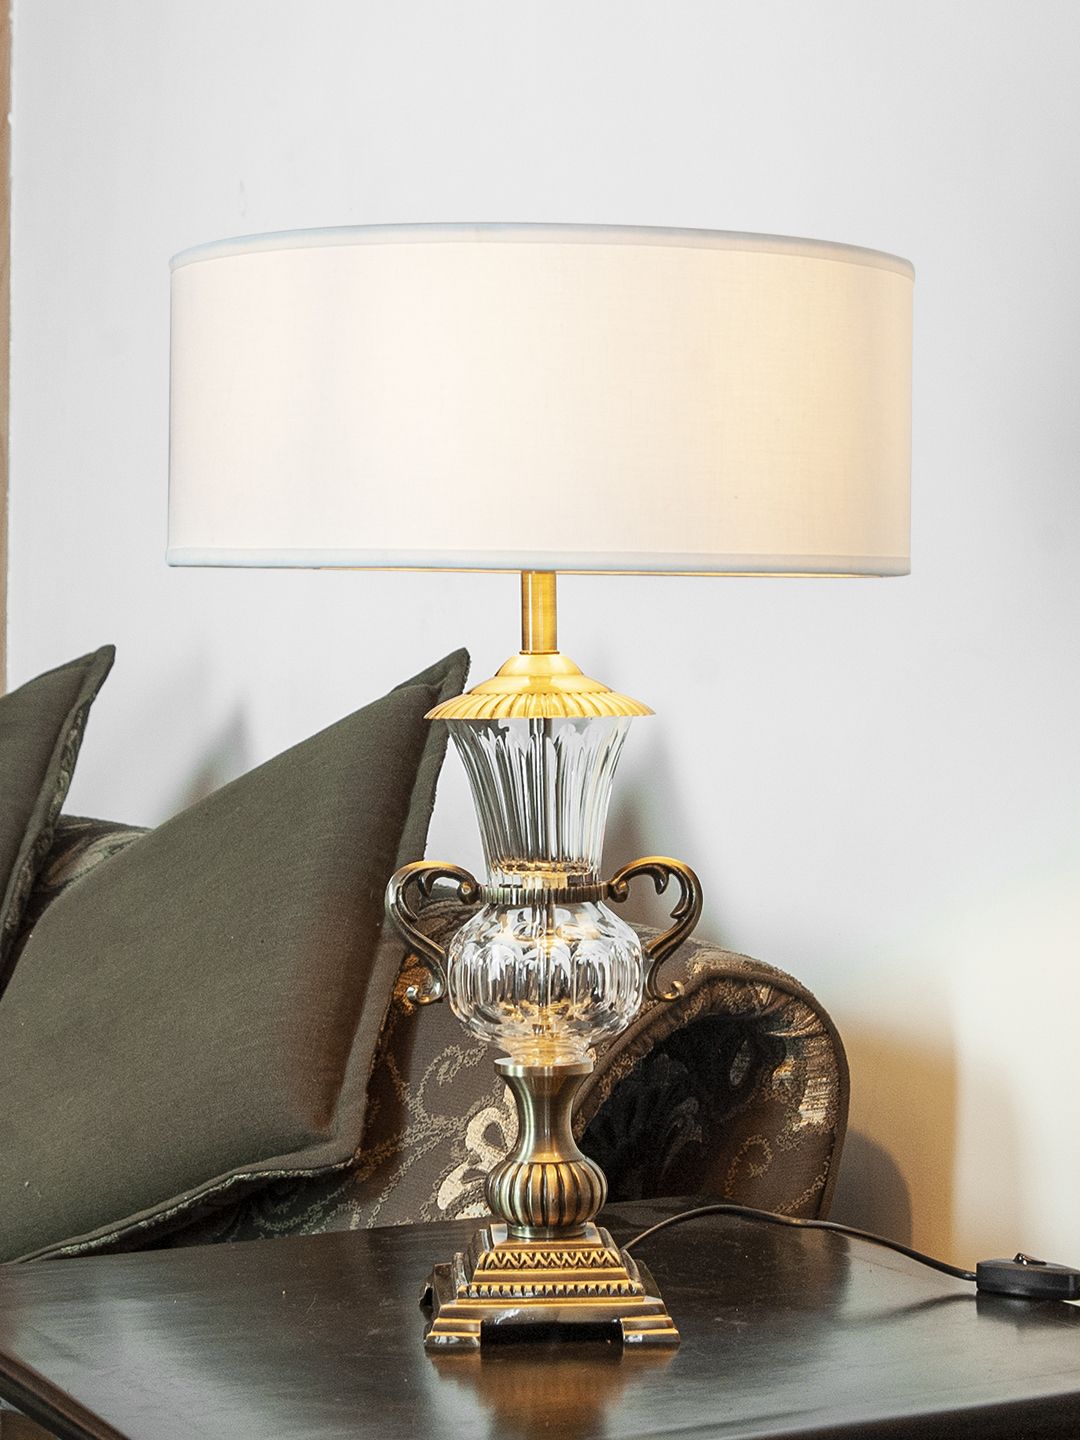 THE LIGHT STORE Gold-Toned Self Design Bedside Standard Table Lamp with Shade Price in India